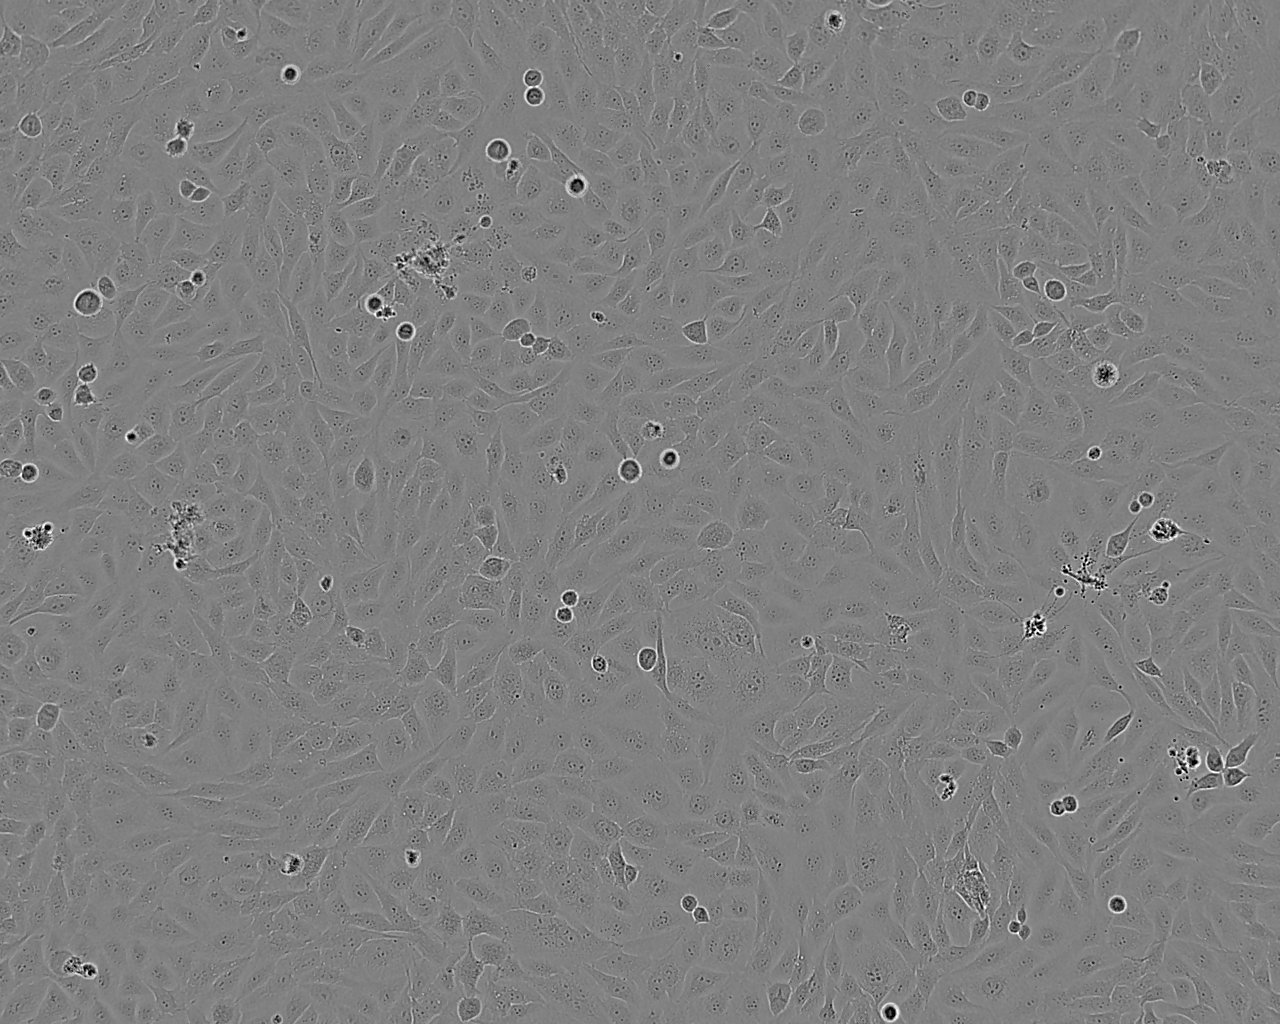 CCD-1095Sk epithelioid cells人乳腺浸润性导管癌旁皮肤细胞系,CCD-1095Sk epithelioid cells